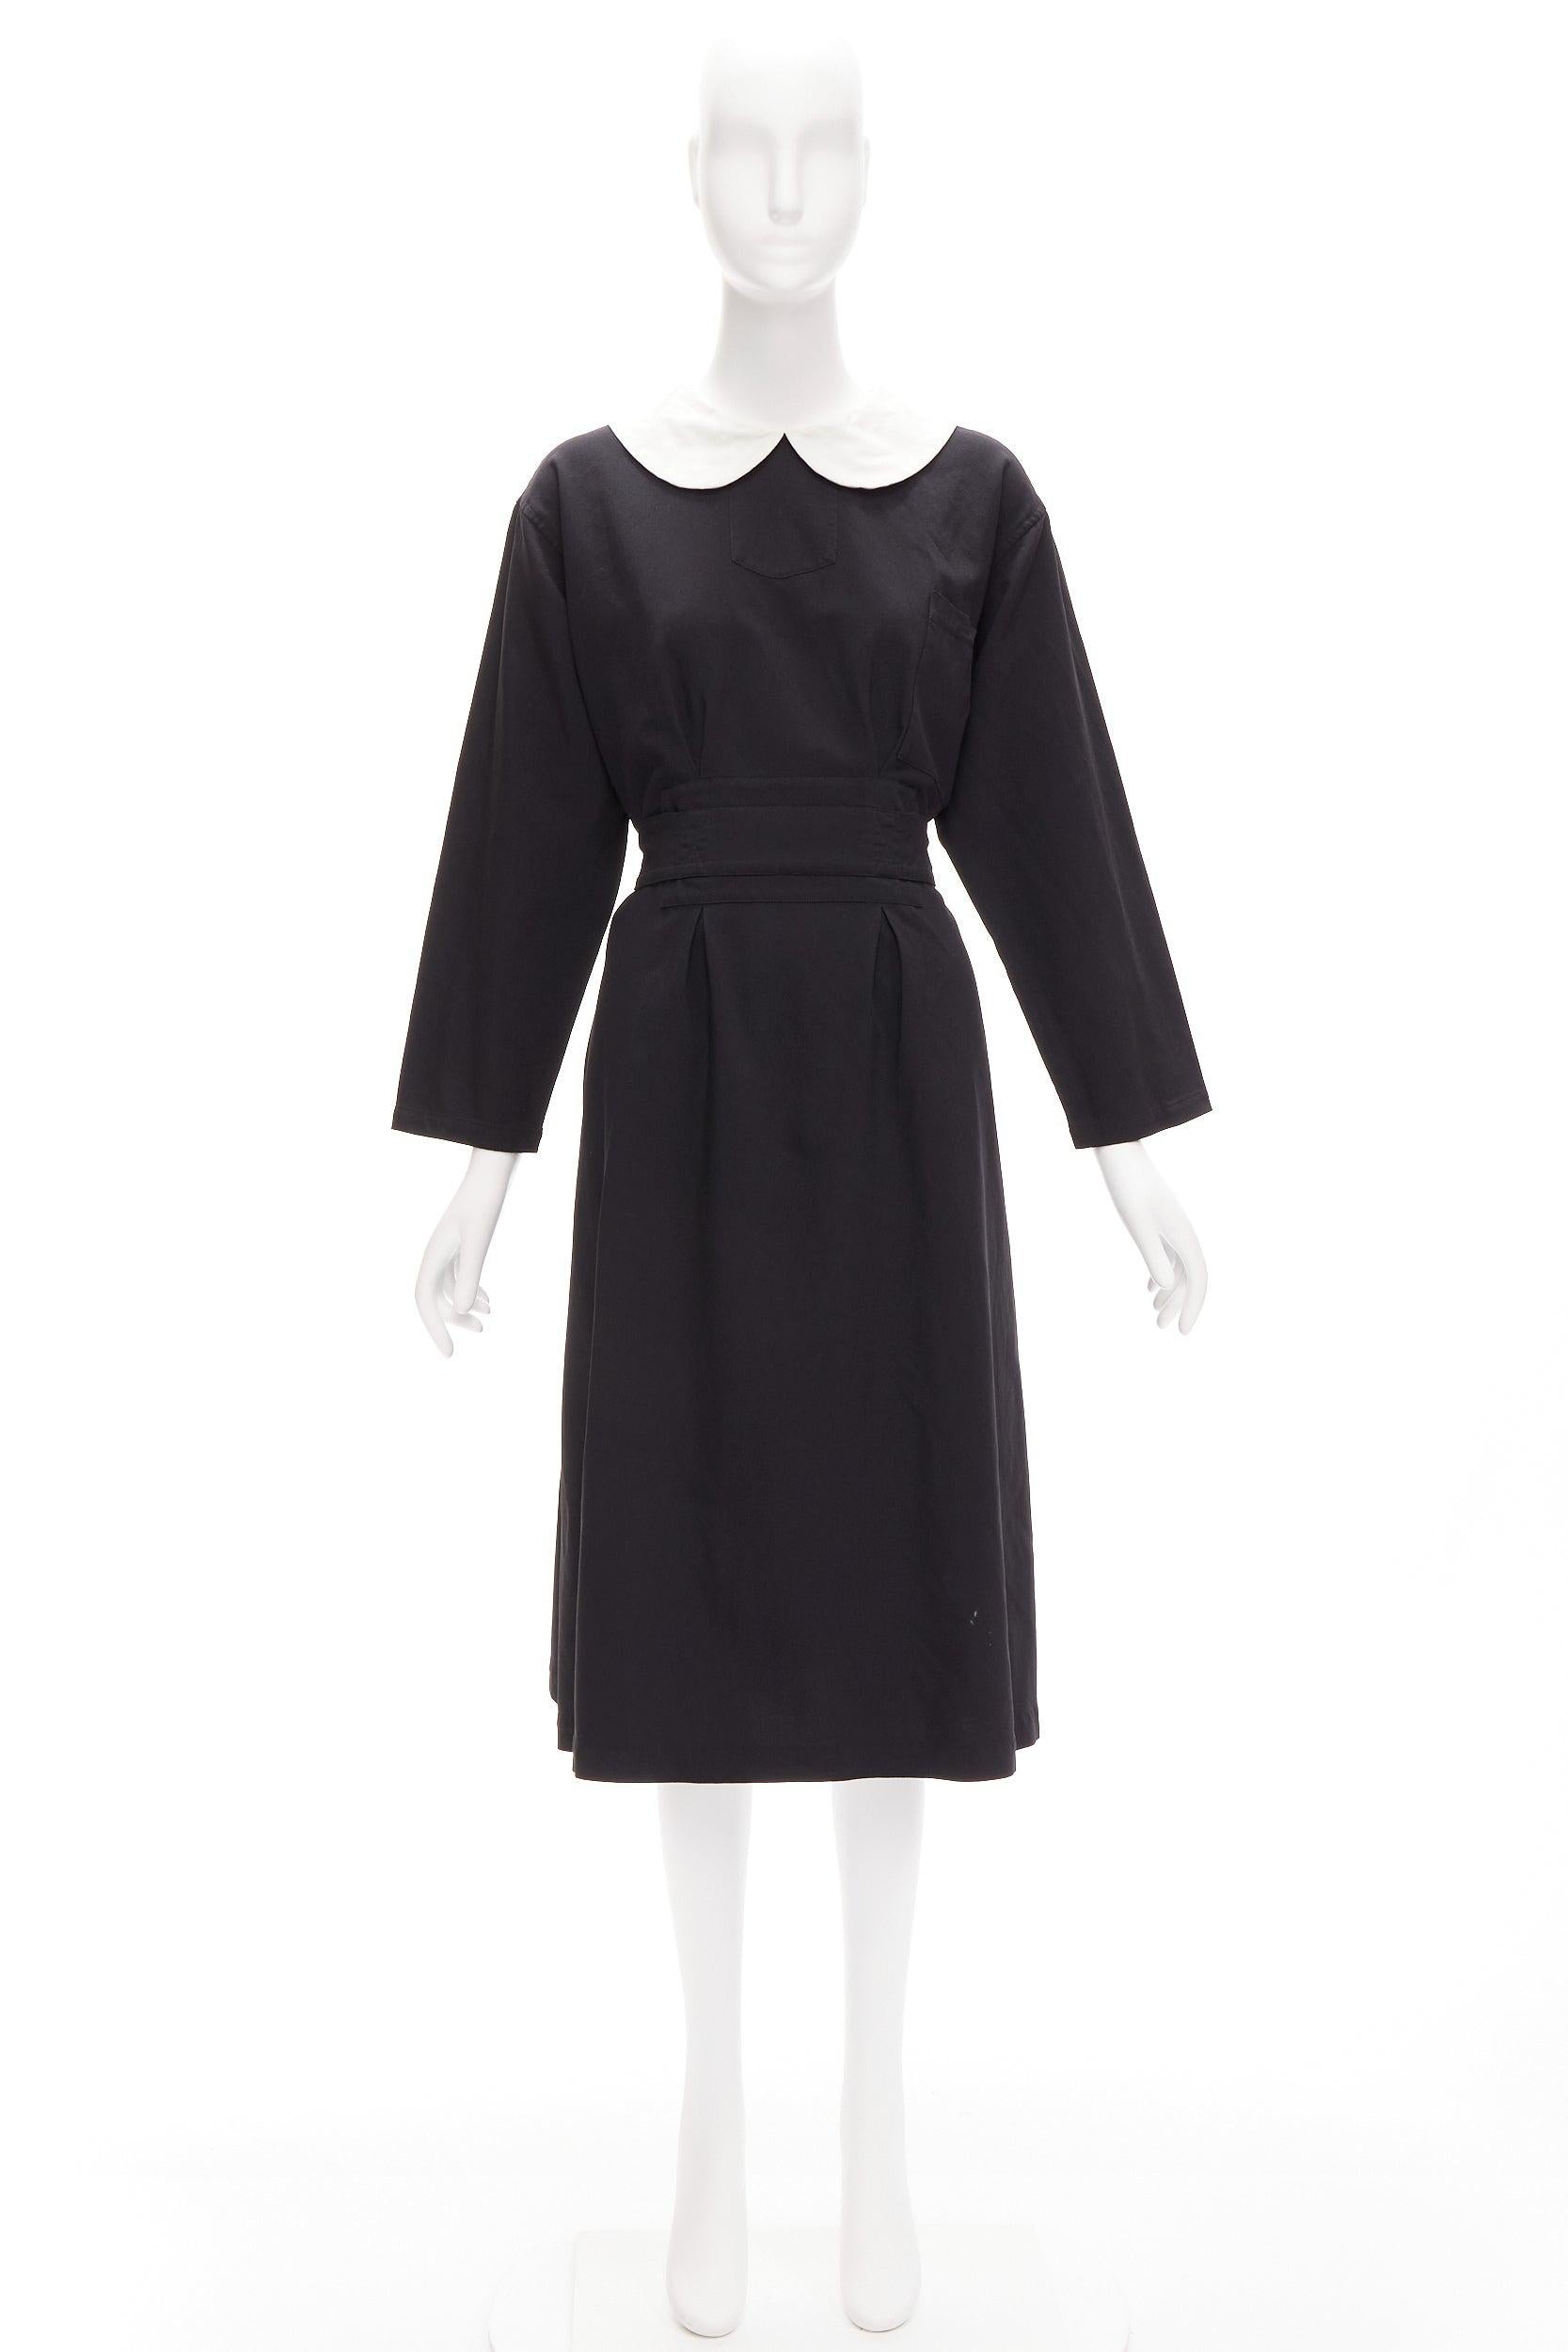 COMME DES GARCONS GIRL white Peter pan collar black belted dress S For Sale 4